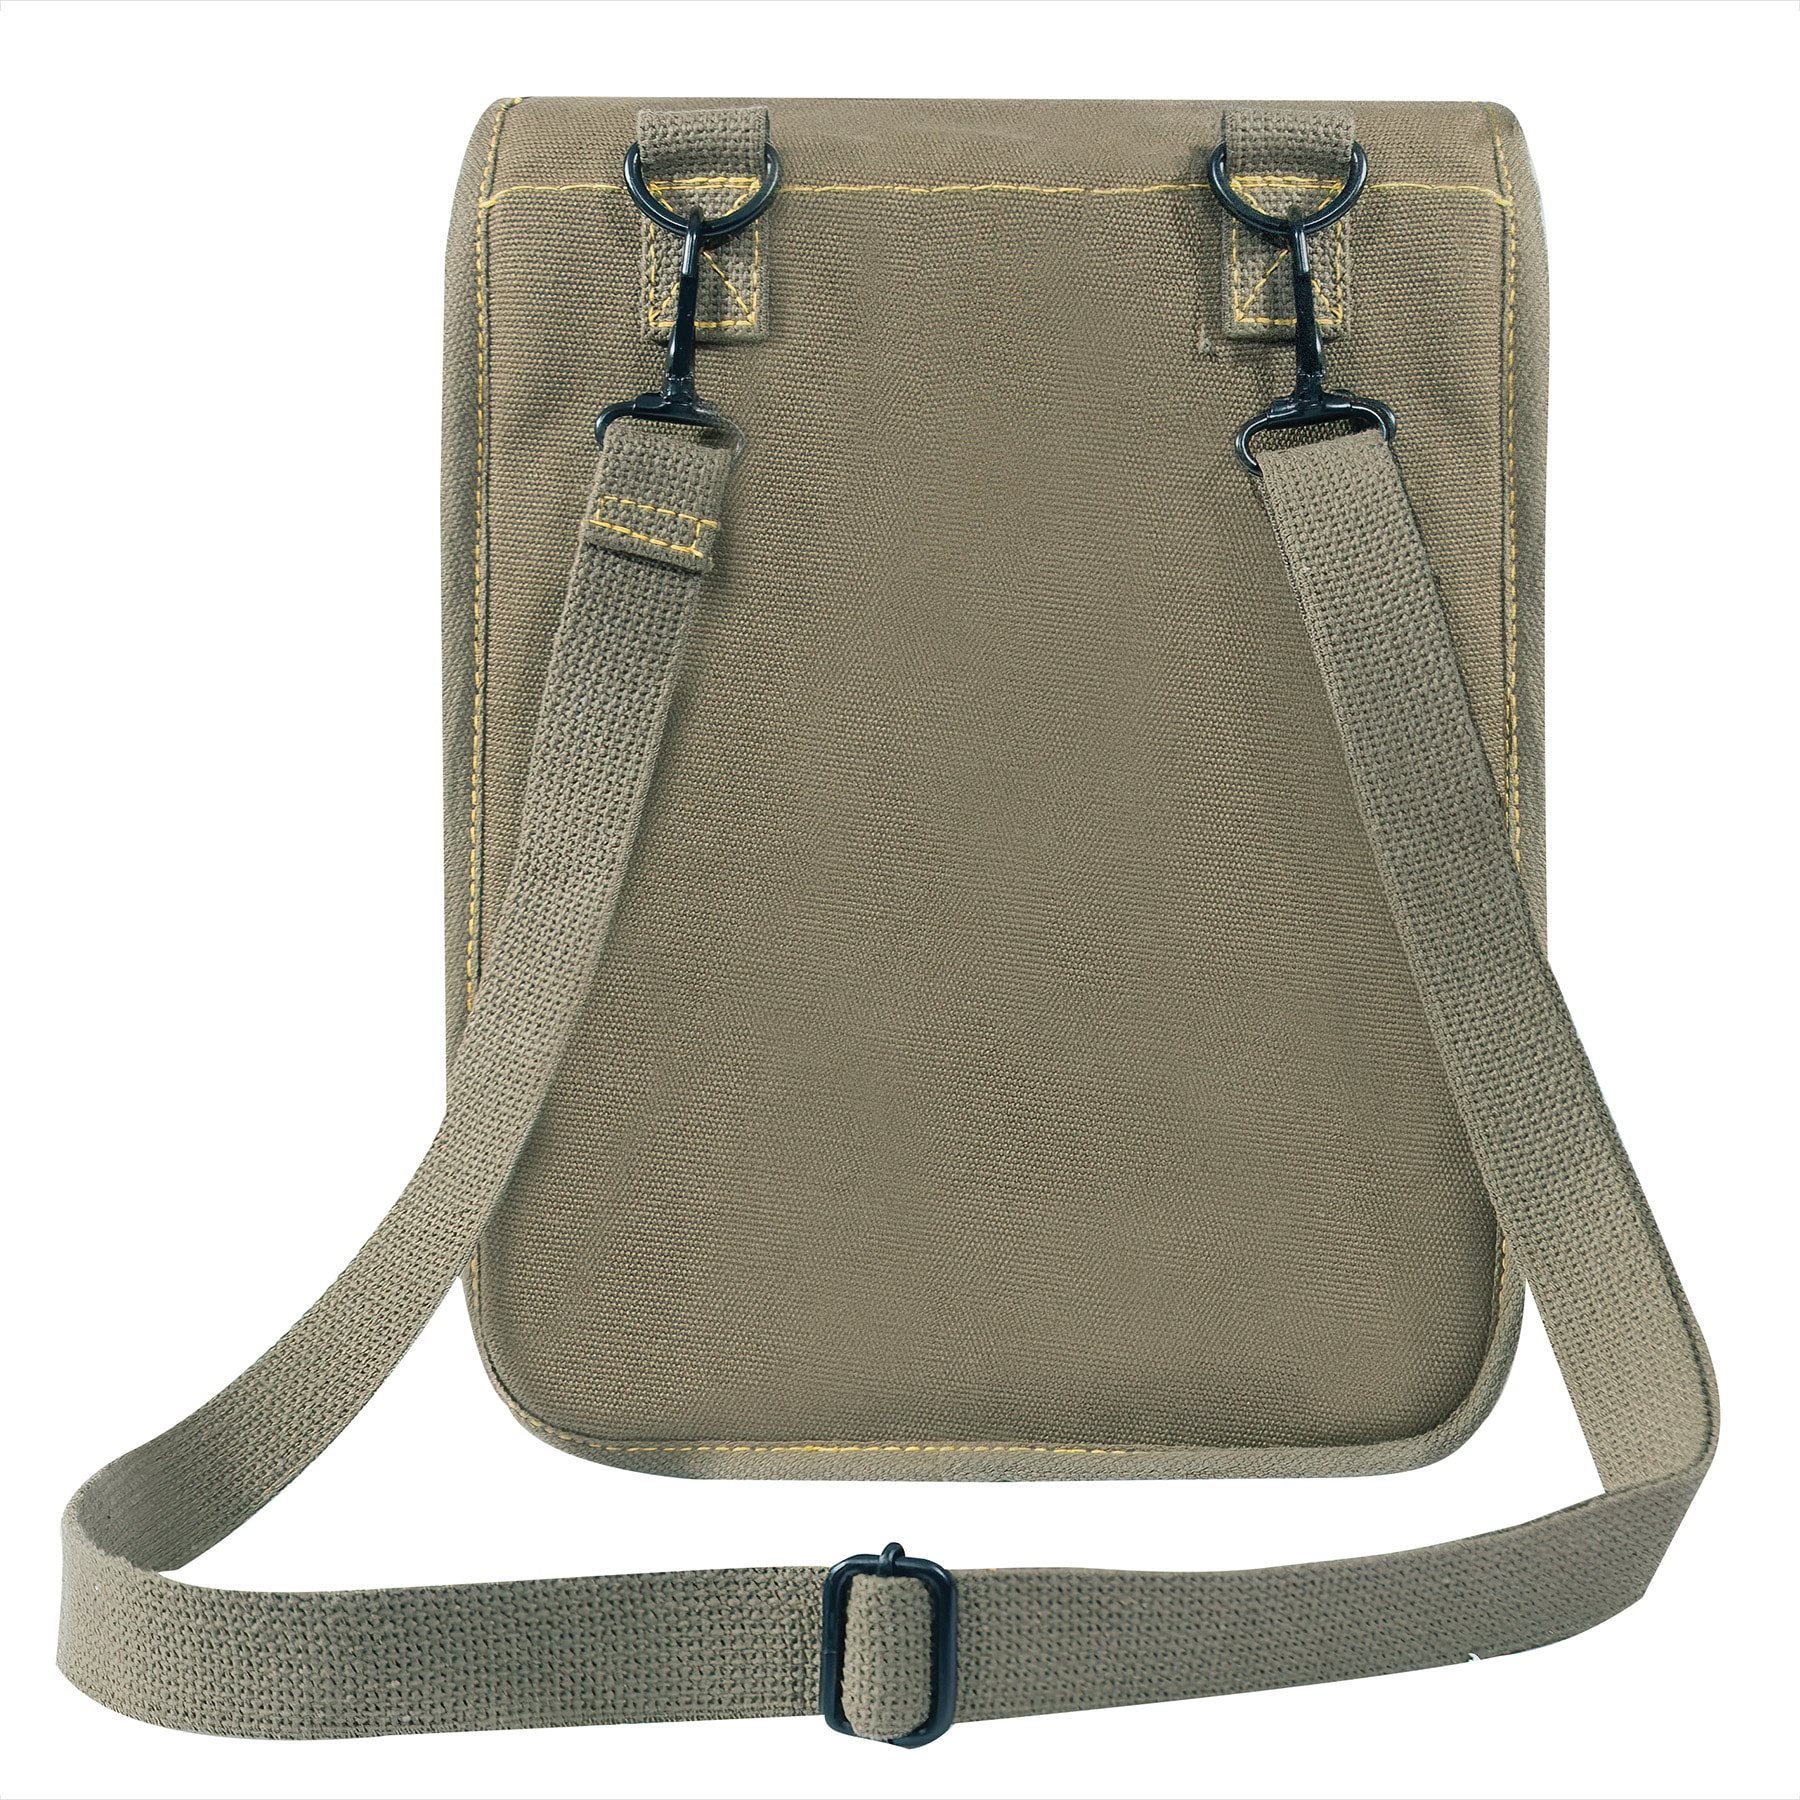 Hagor 4L Small Canvas Military Map Bag in IDF Olive Drab